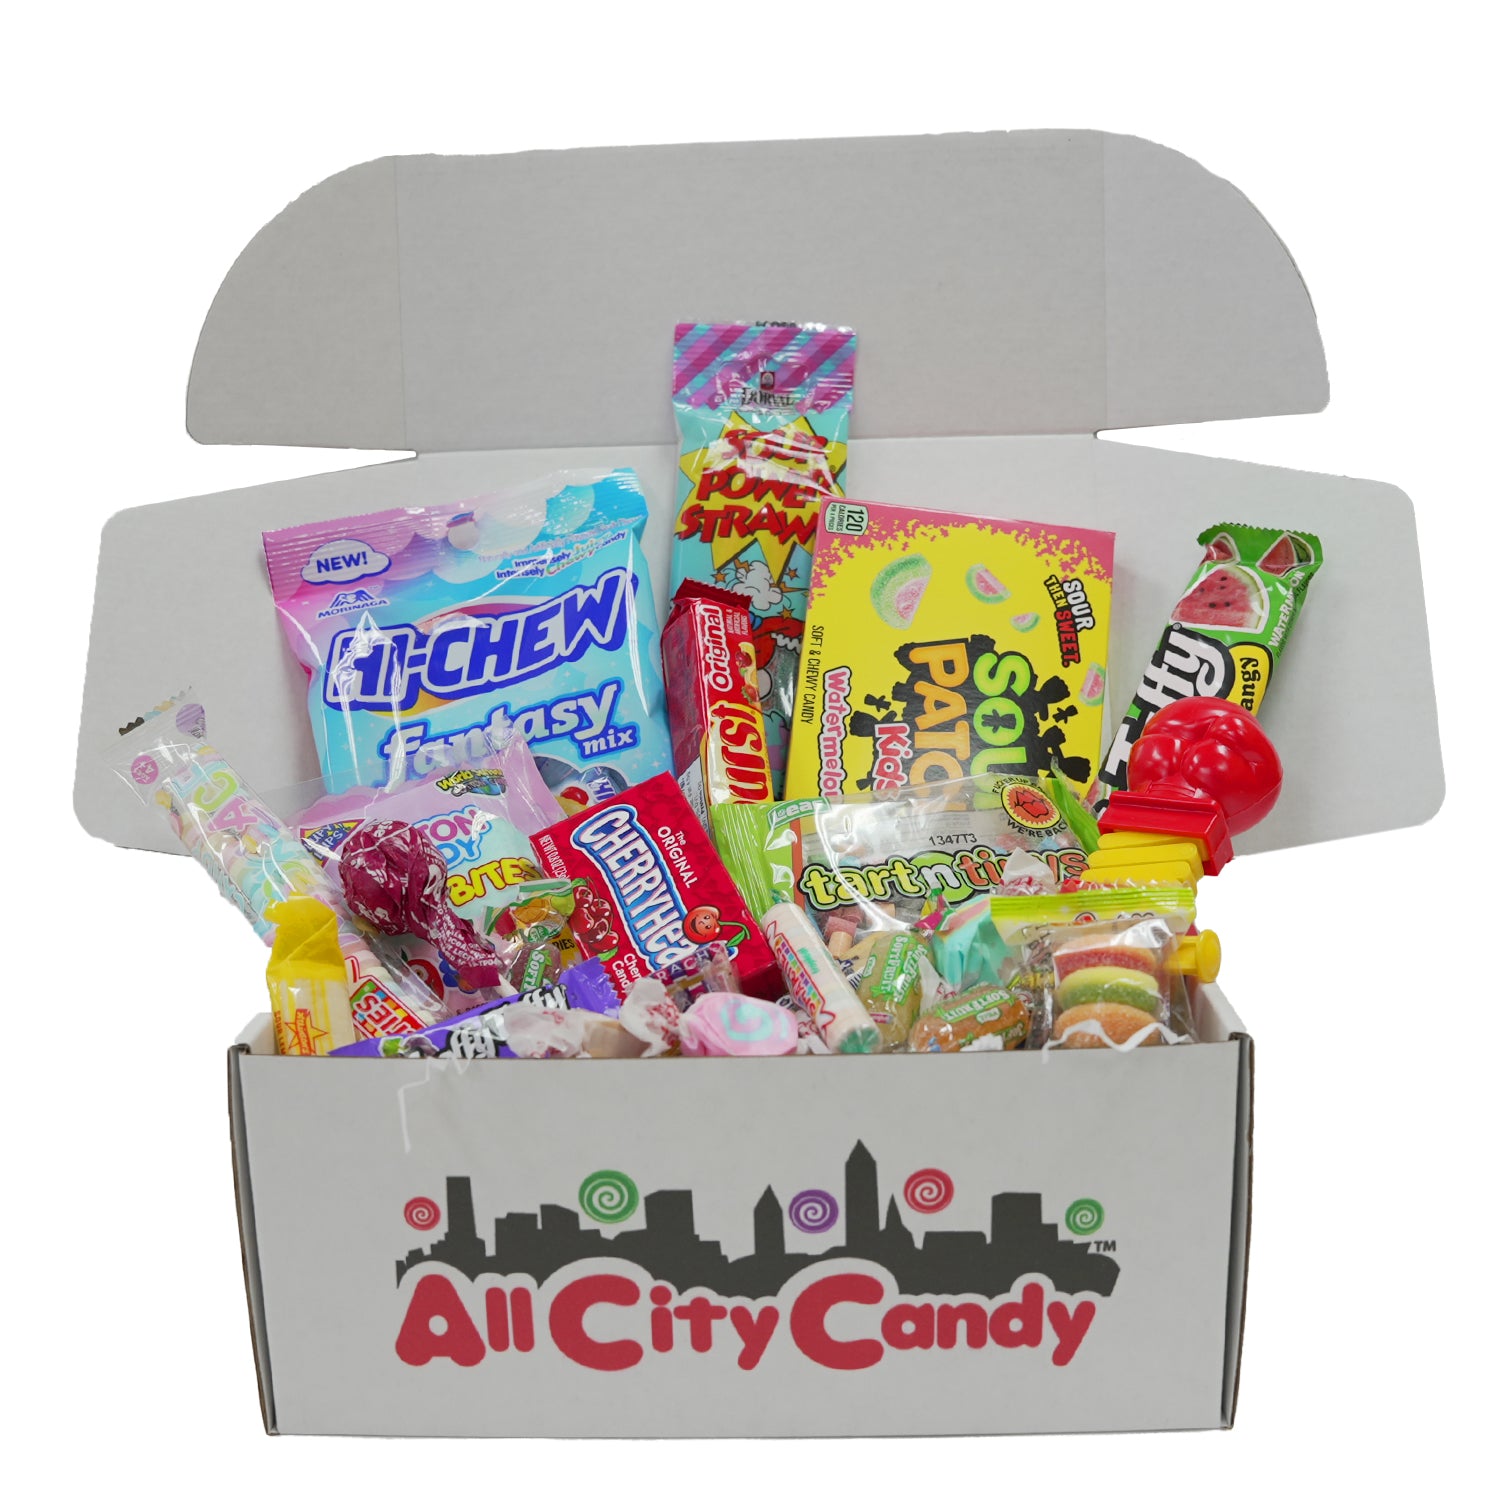 All City Candy's I ♥️ Candy A Lot Assortment Box